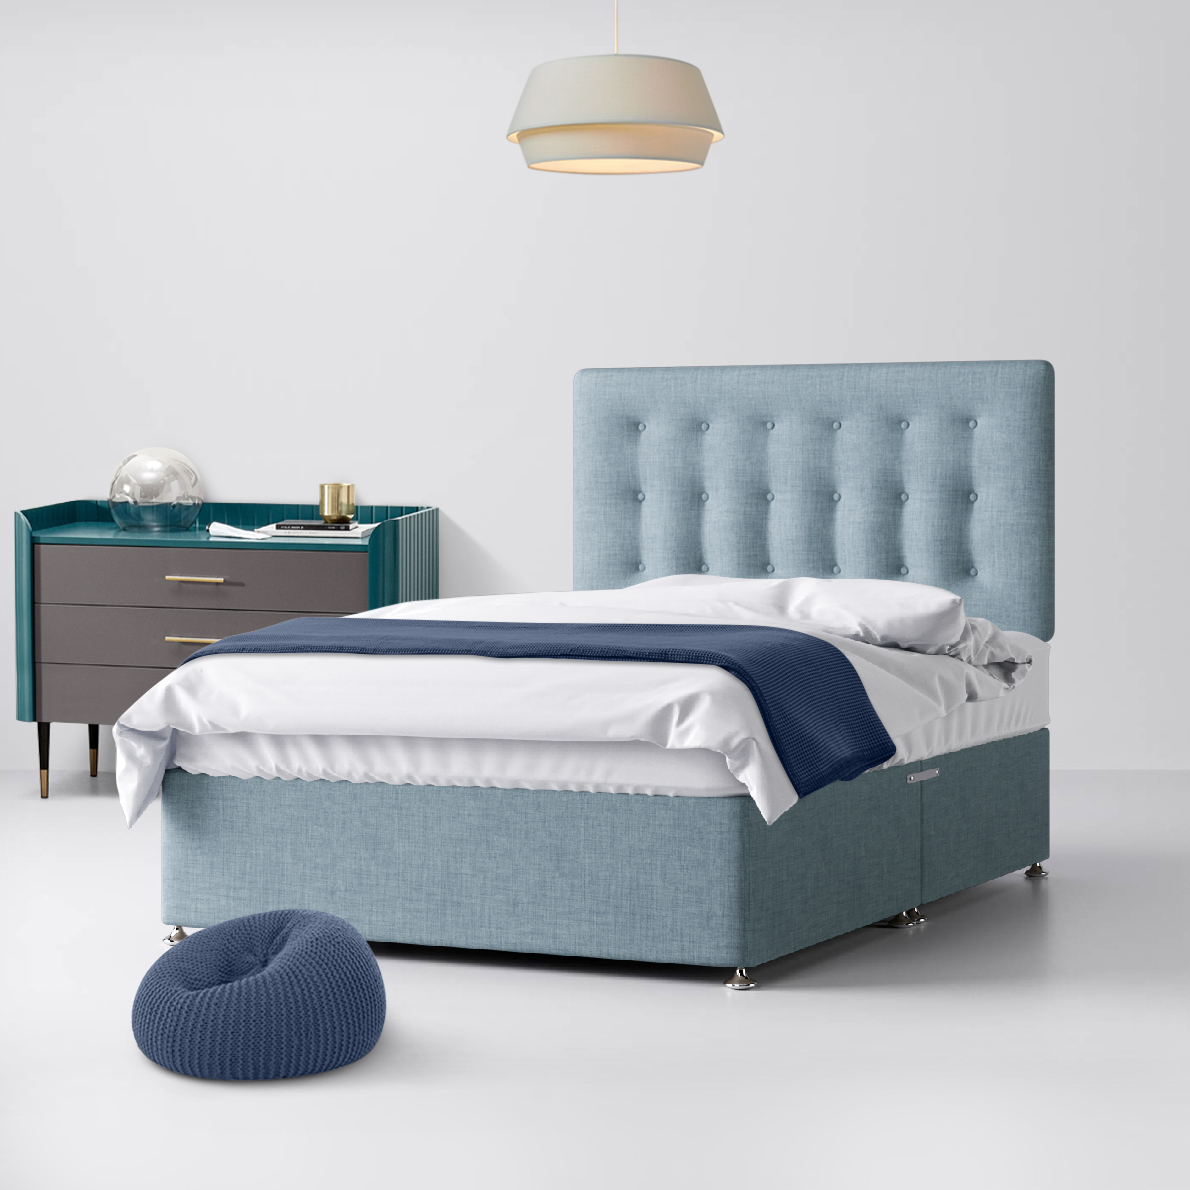 Small Double - Divan Bed and Cornell Buttoned Headboard - Duck Egg Blue - Fabric - 4ft - Happy Beds